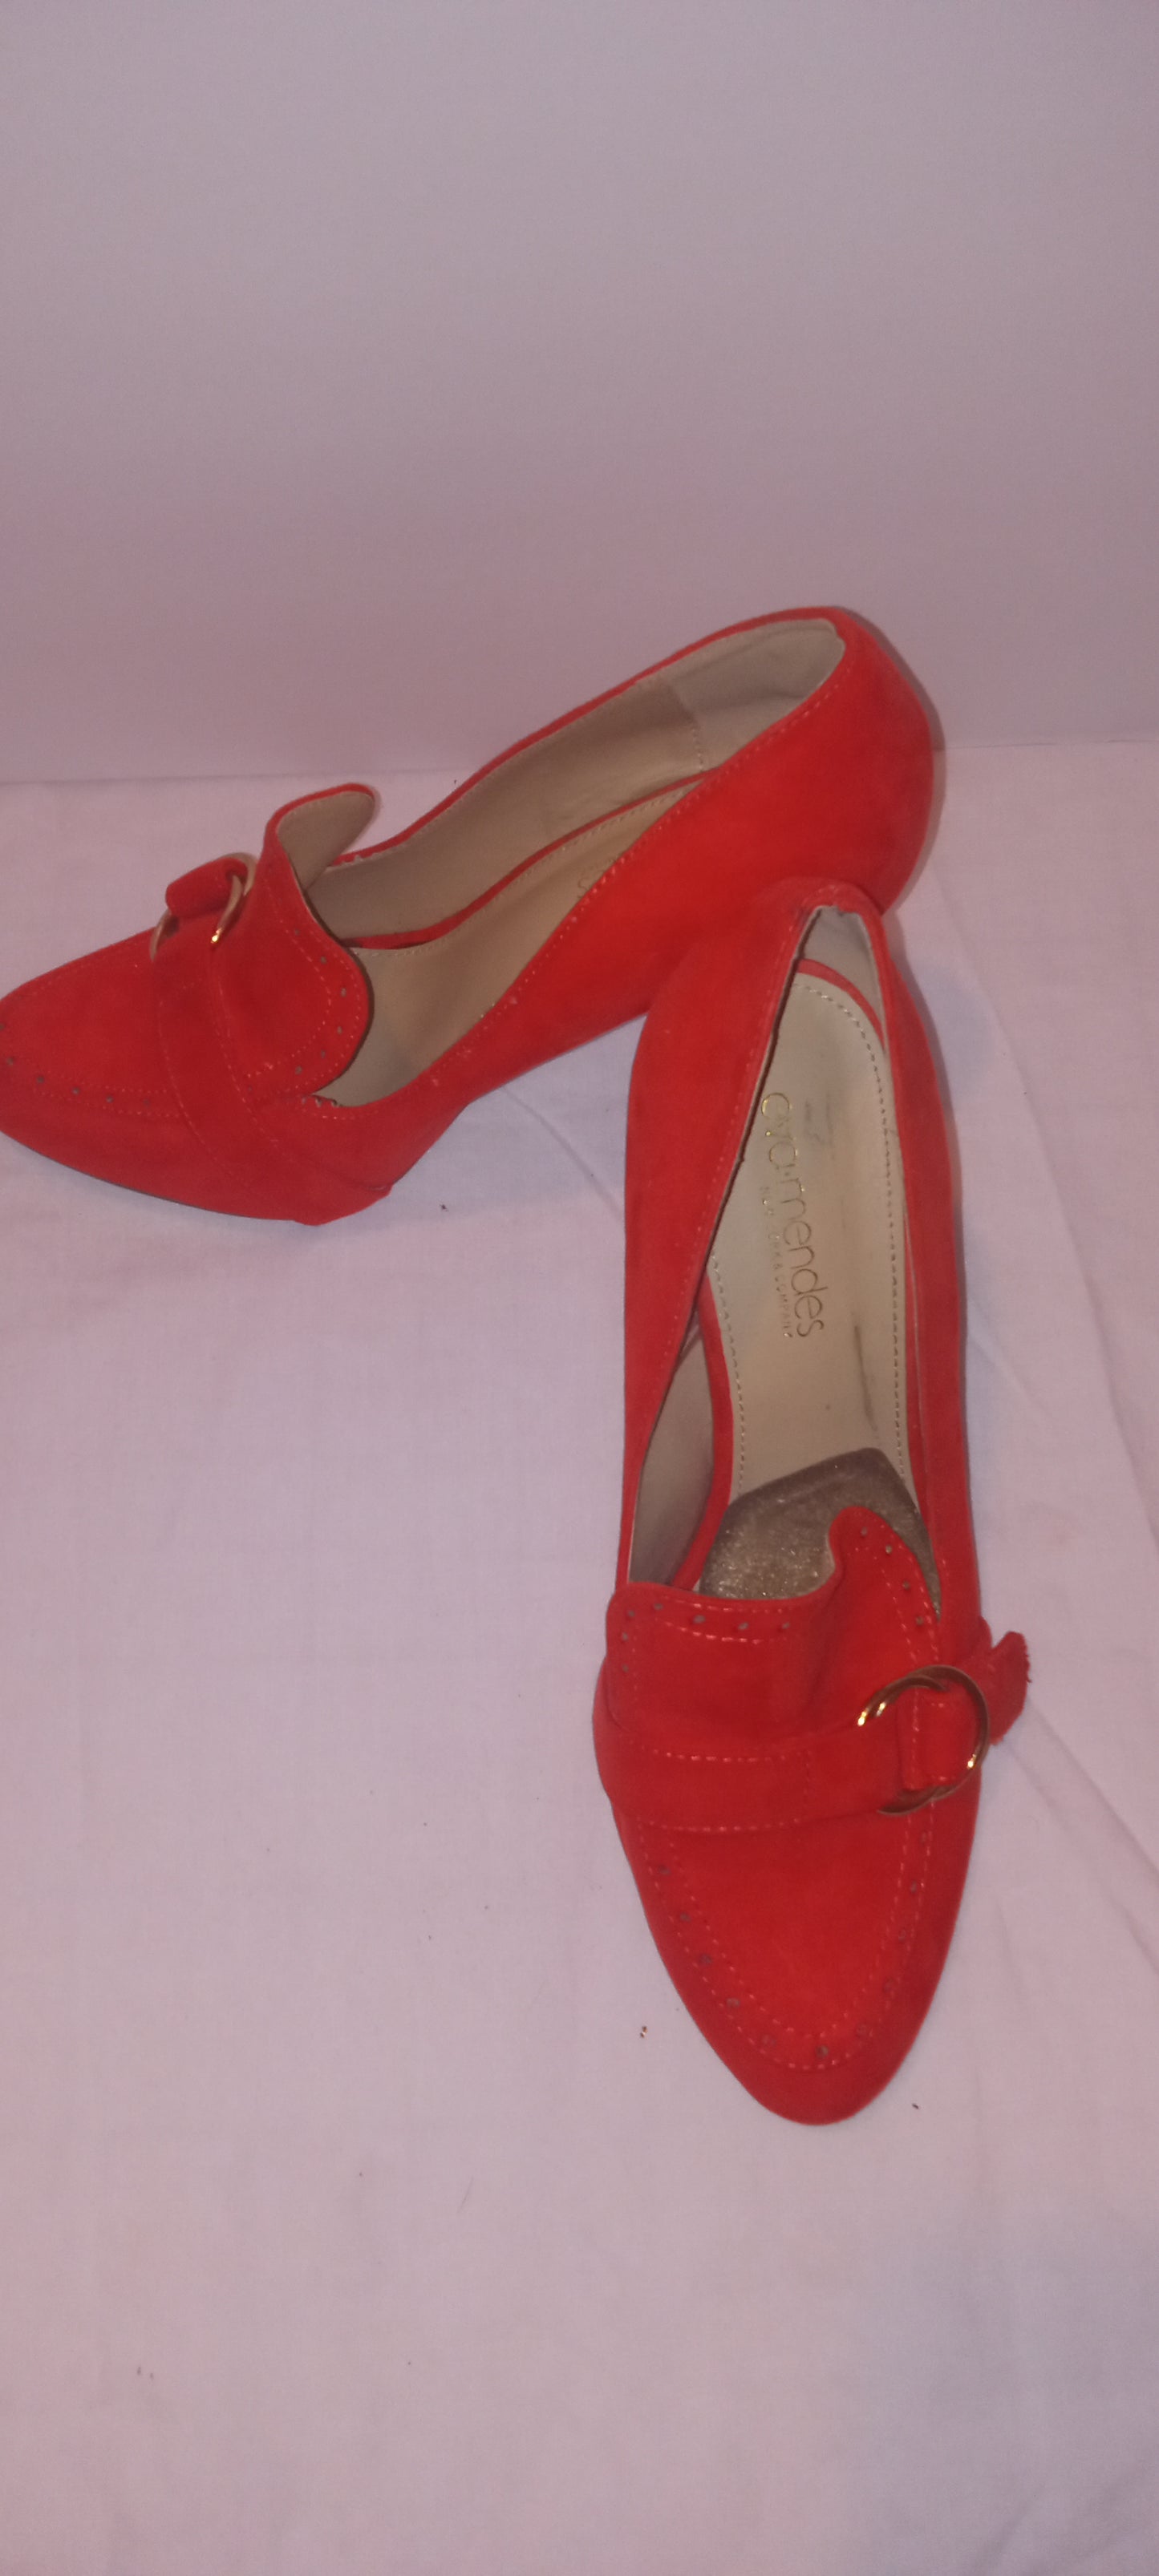 Shoes Woman Eva Mendes Used